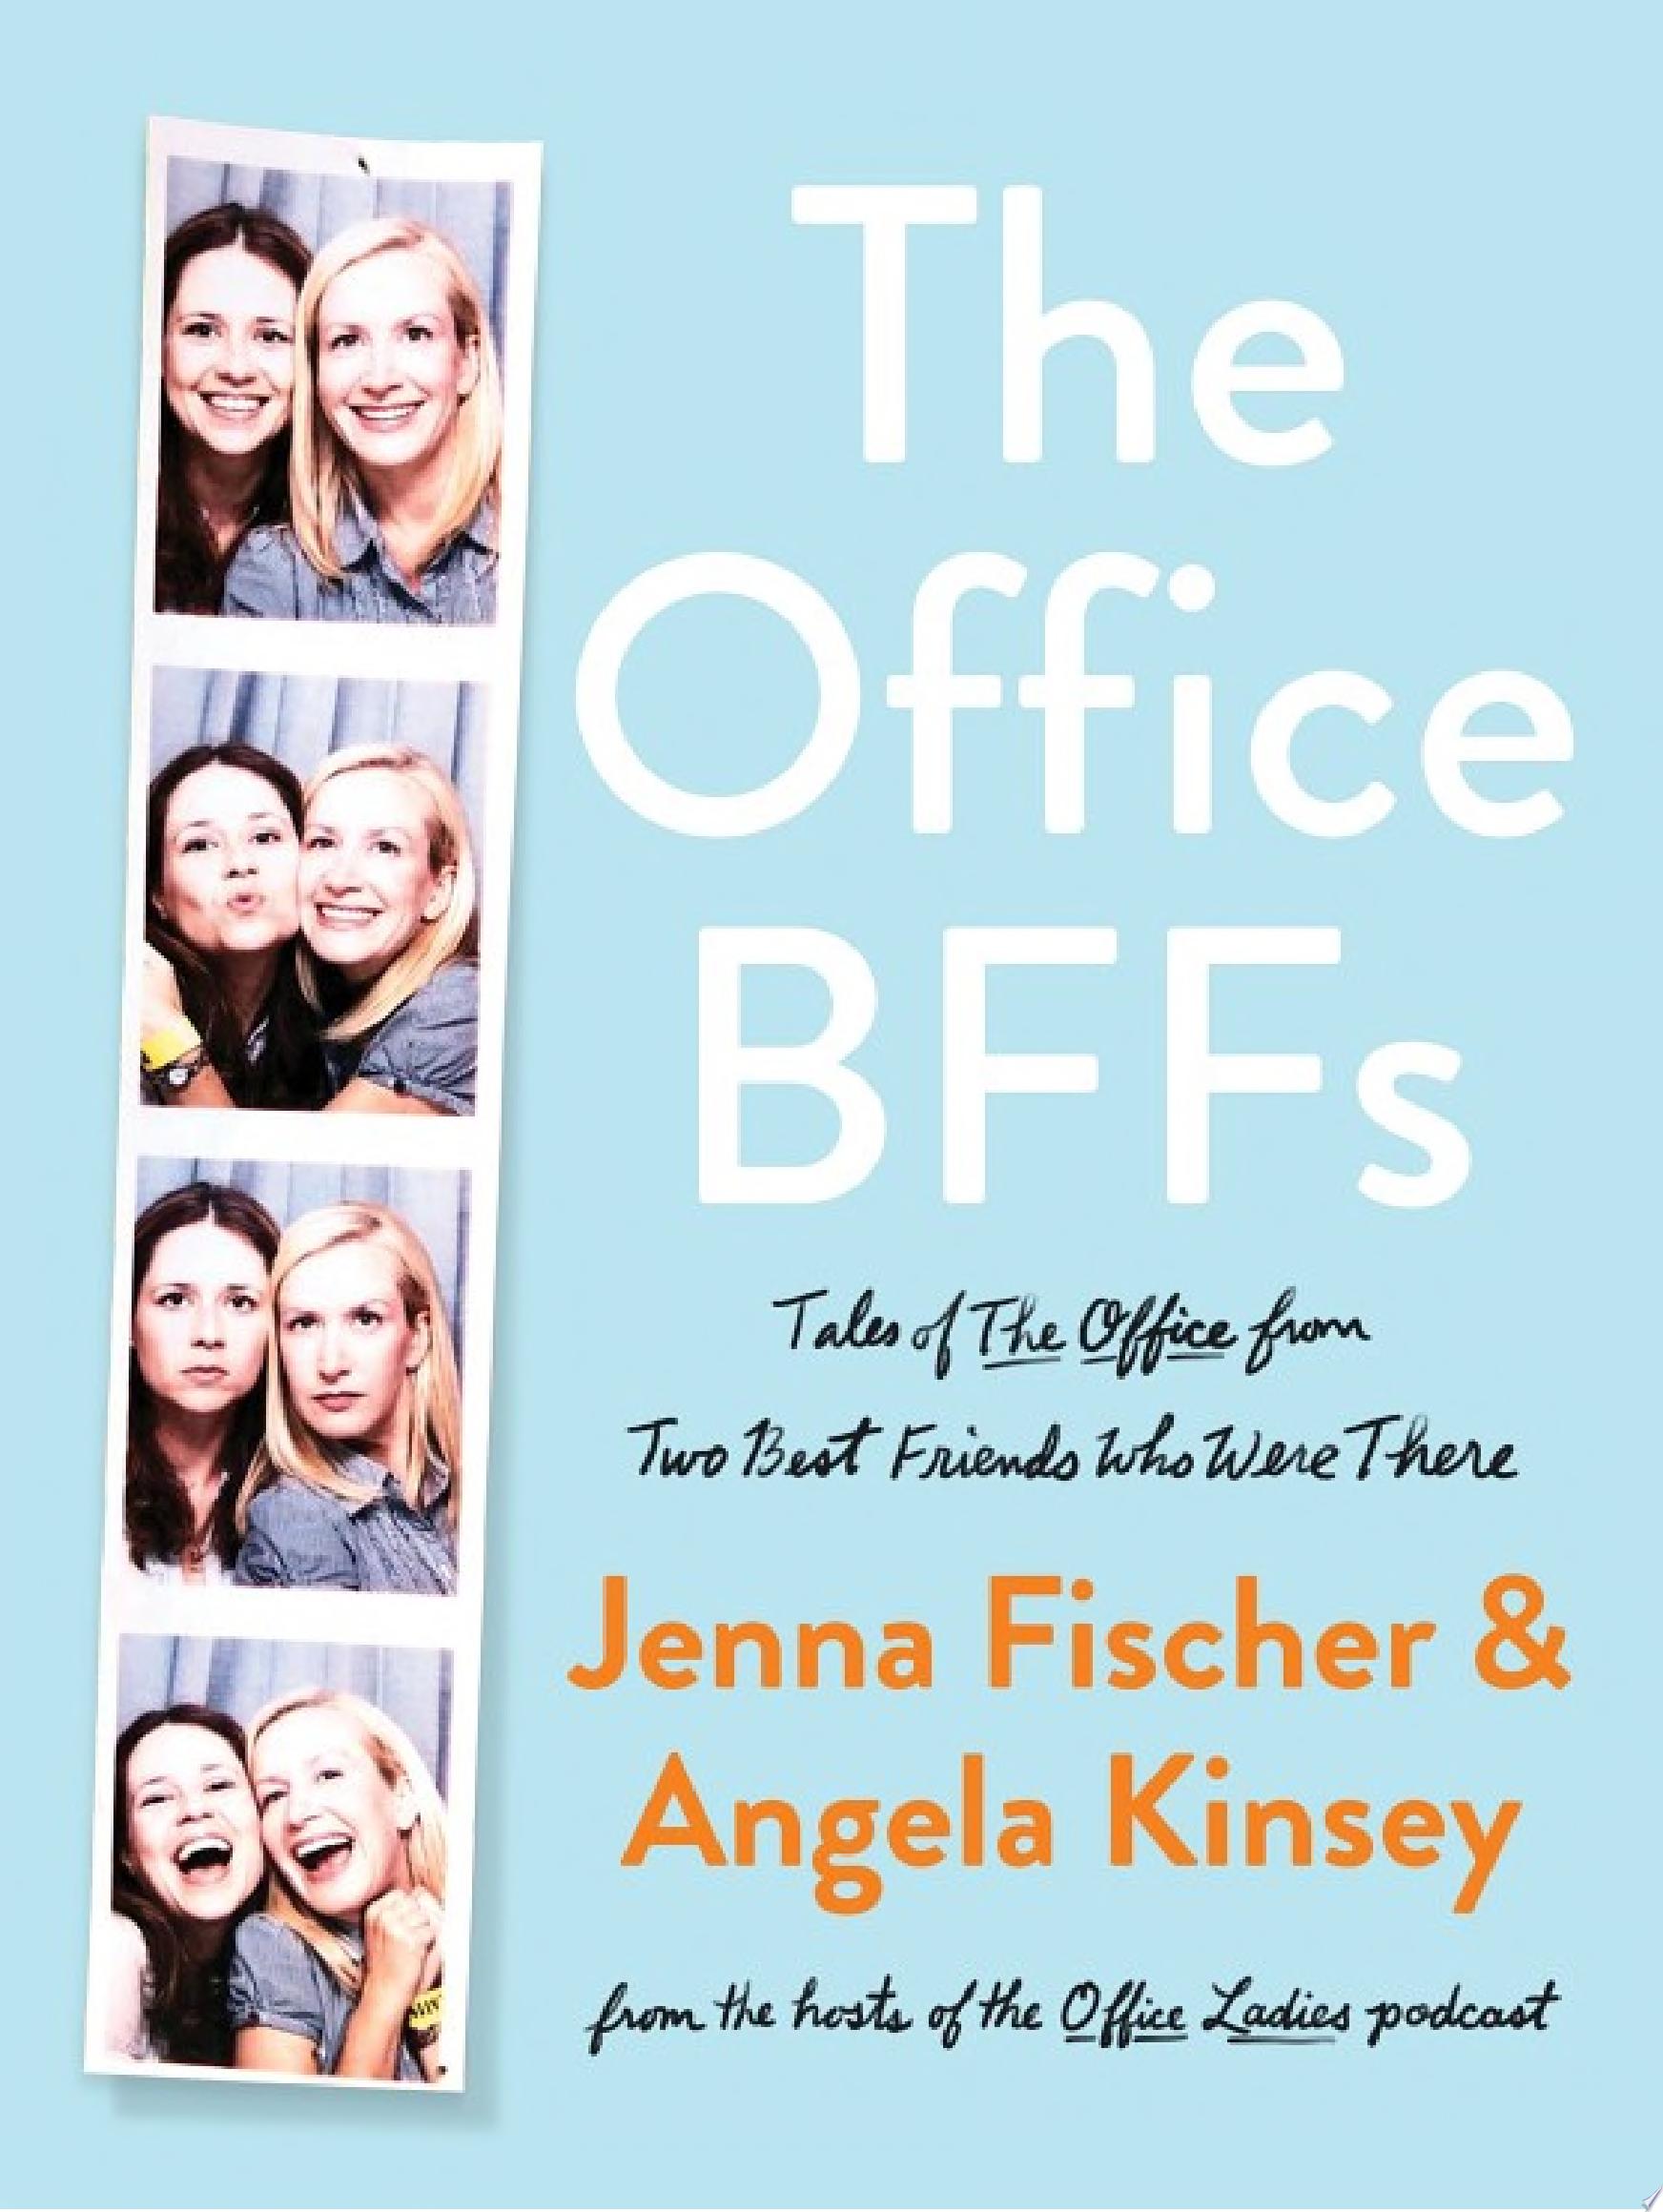 Image for "The Office BFFs"